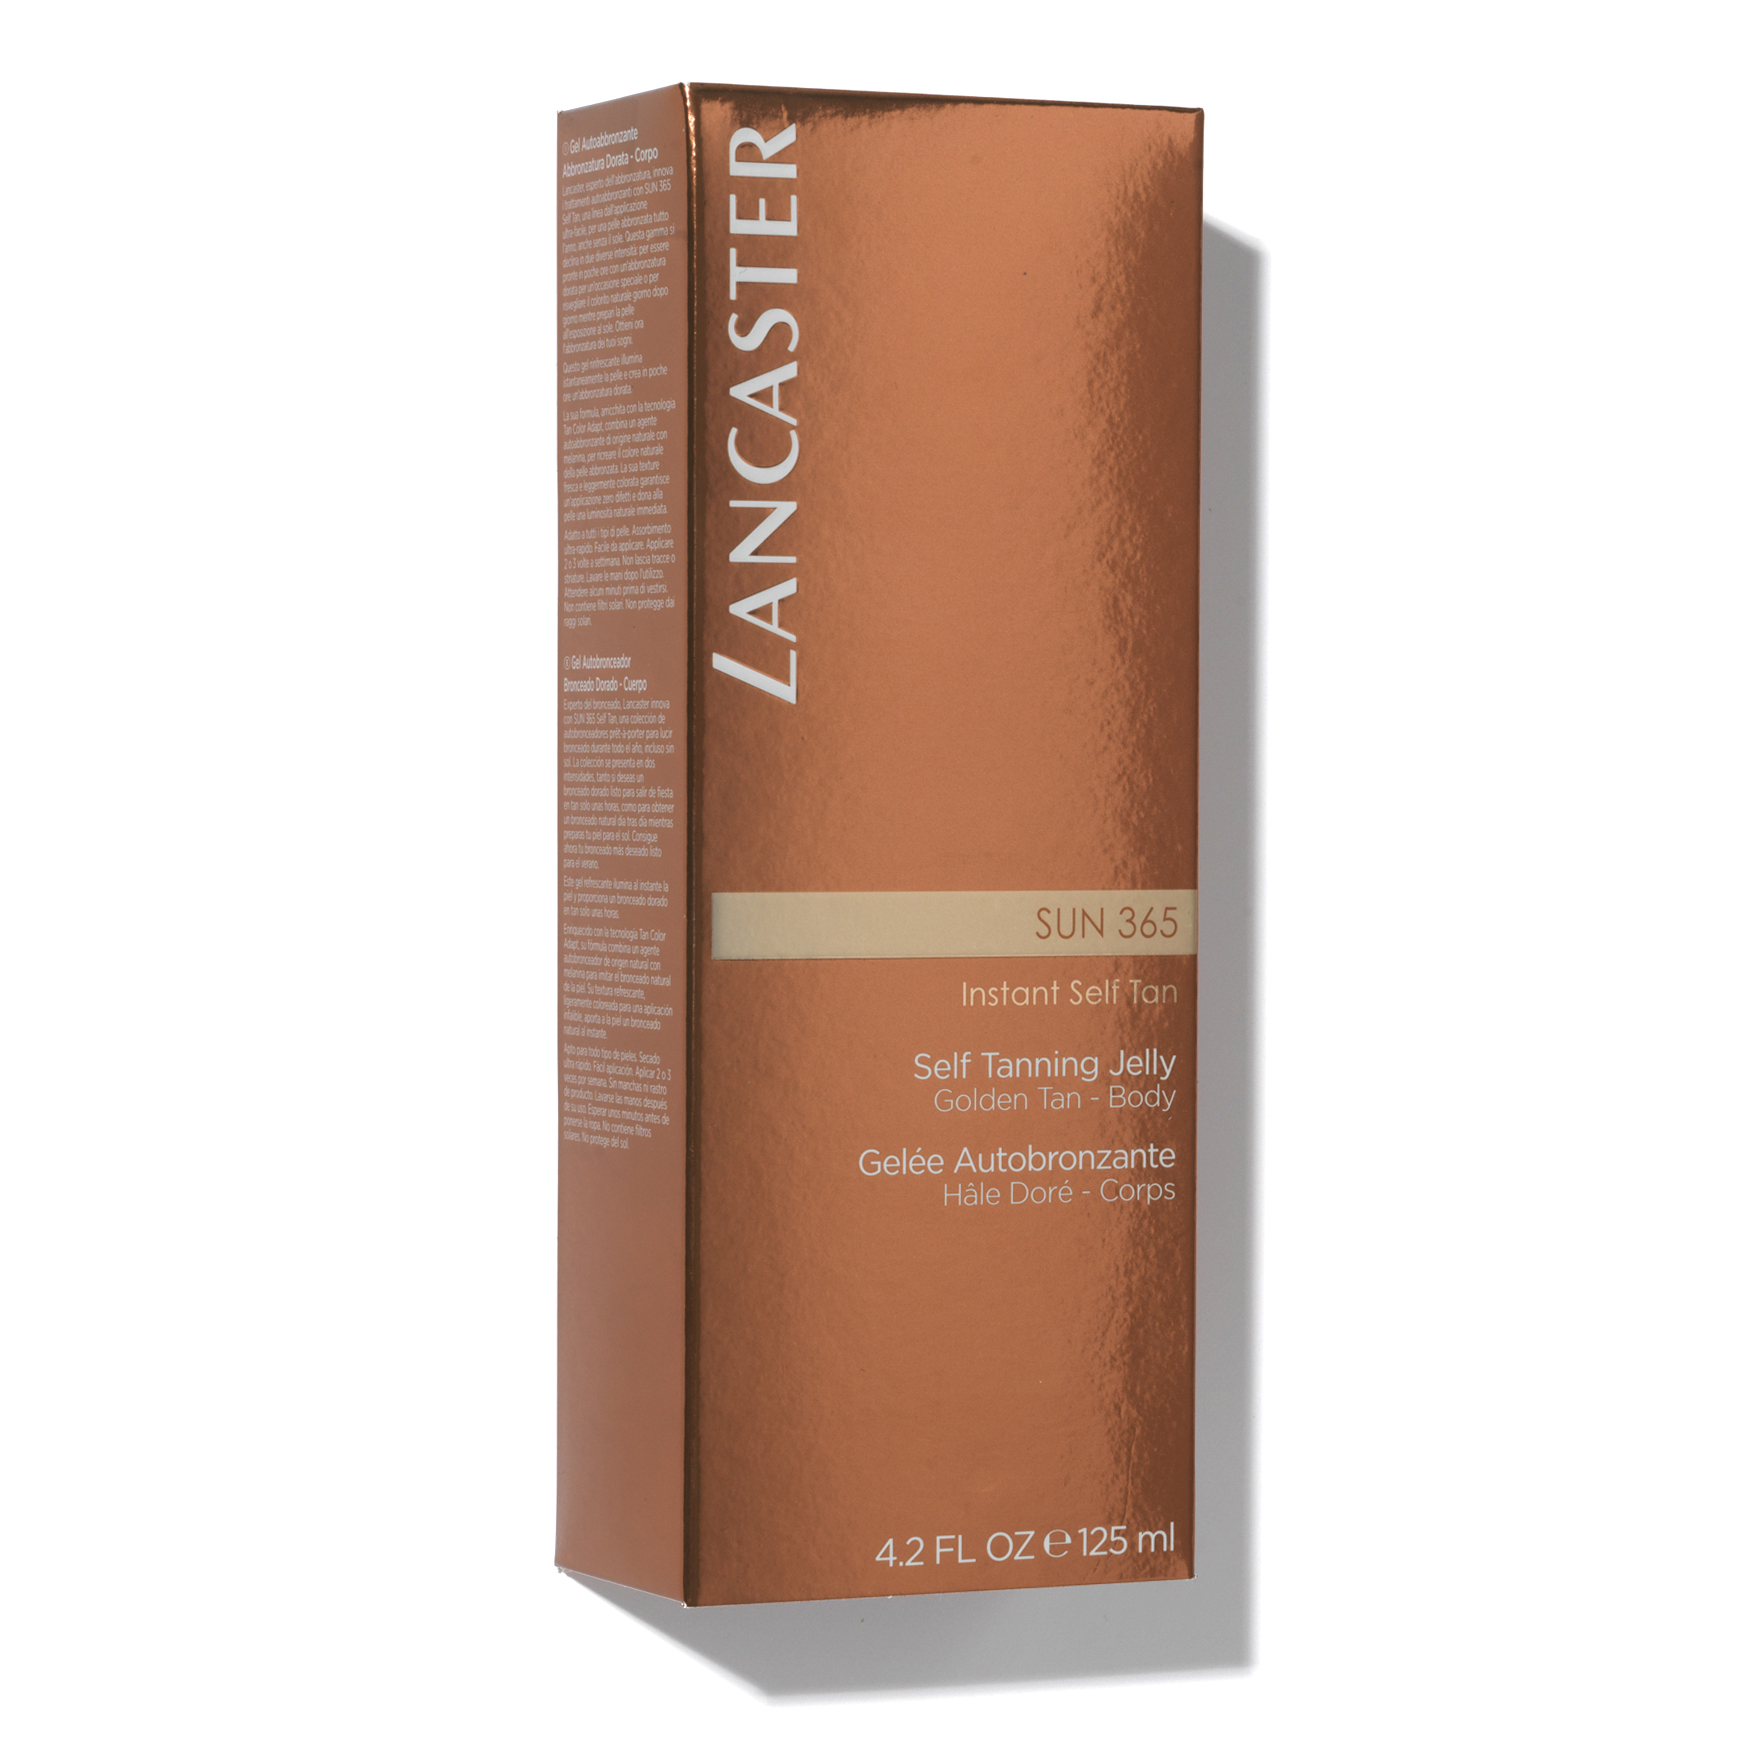 Lancaster Sun 365 Instant Self Tanning Body Jelly | Space NK